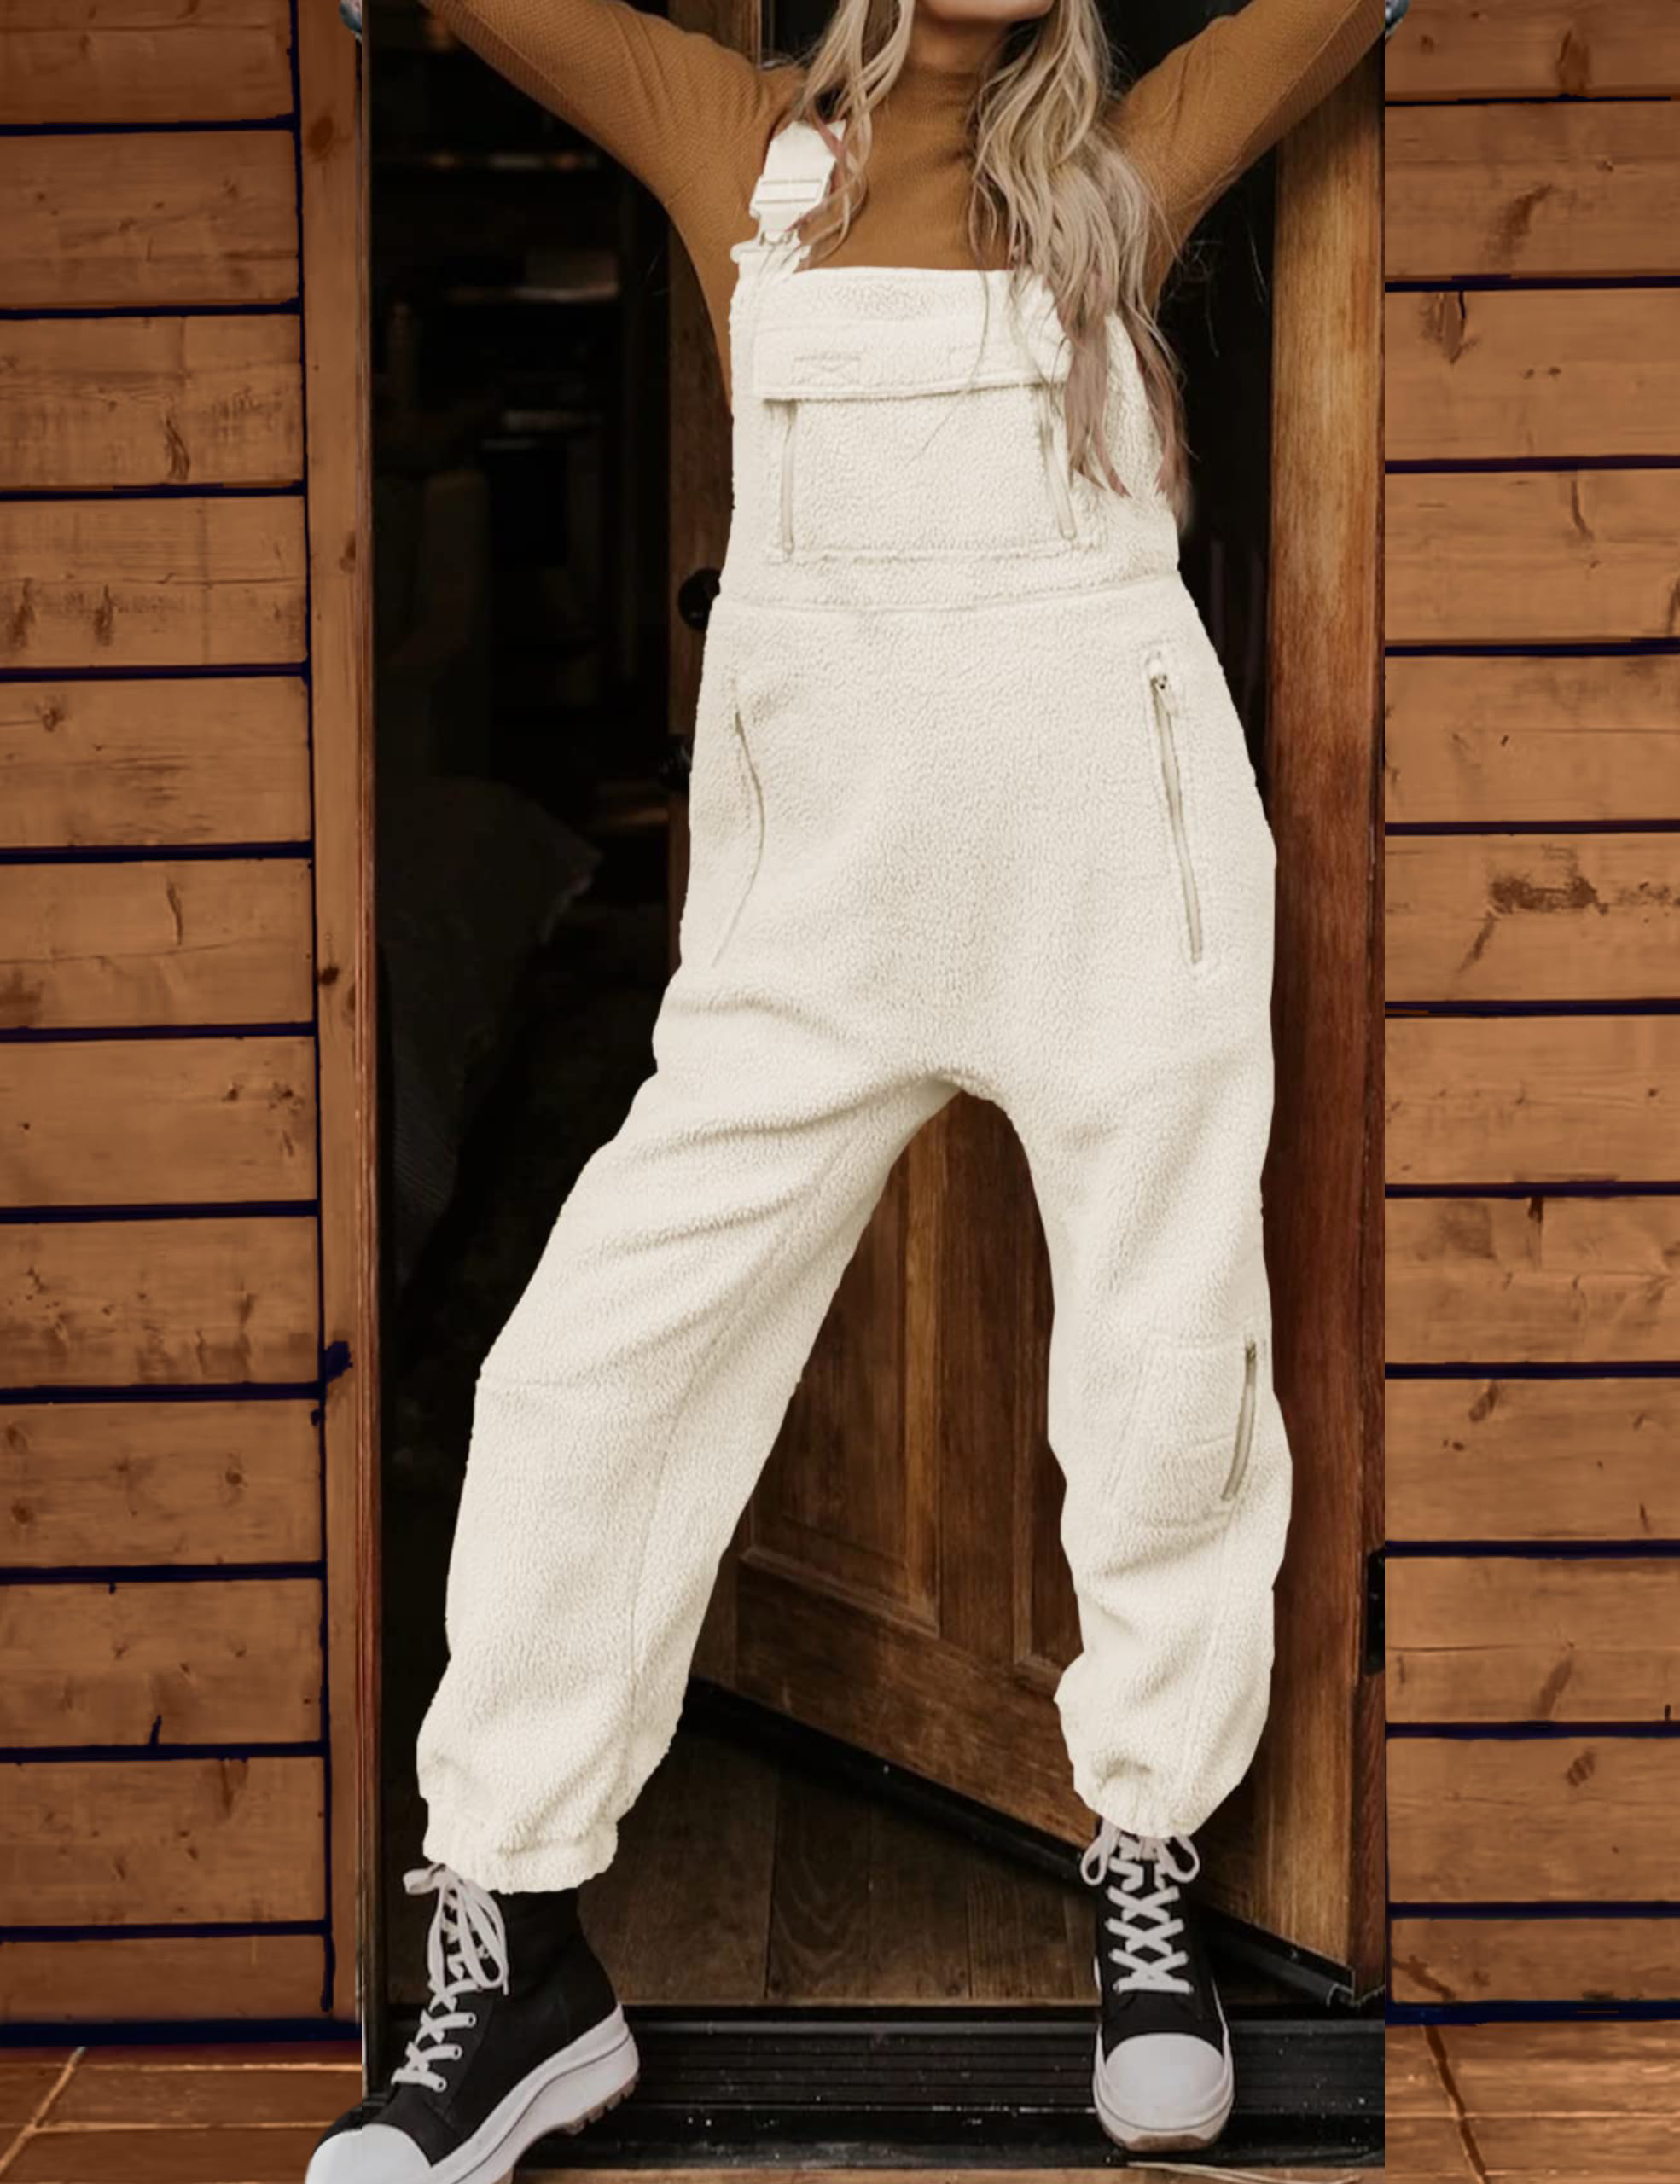 2023 New Women's Fleece Warm Overalls Loose Casual Jumpsuits (Buy 2 Free Shipping)